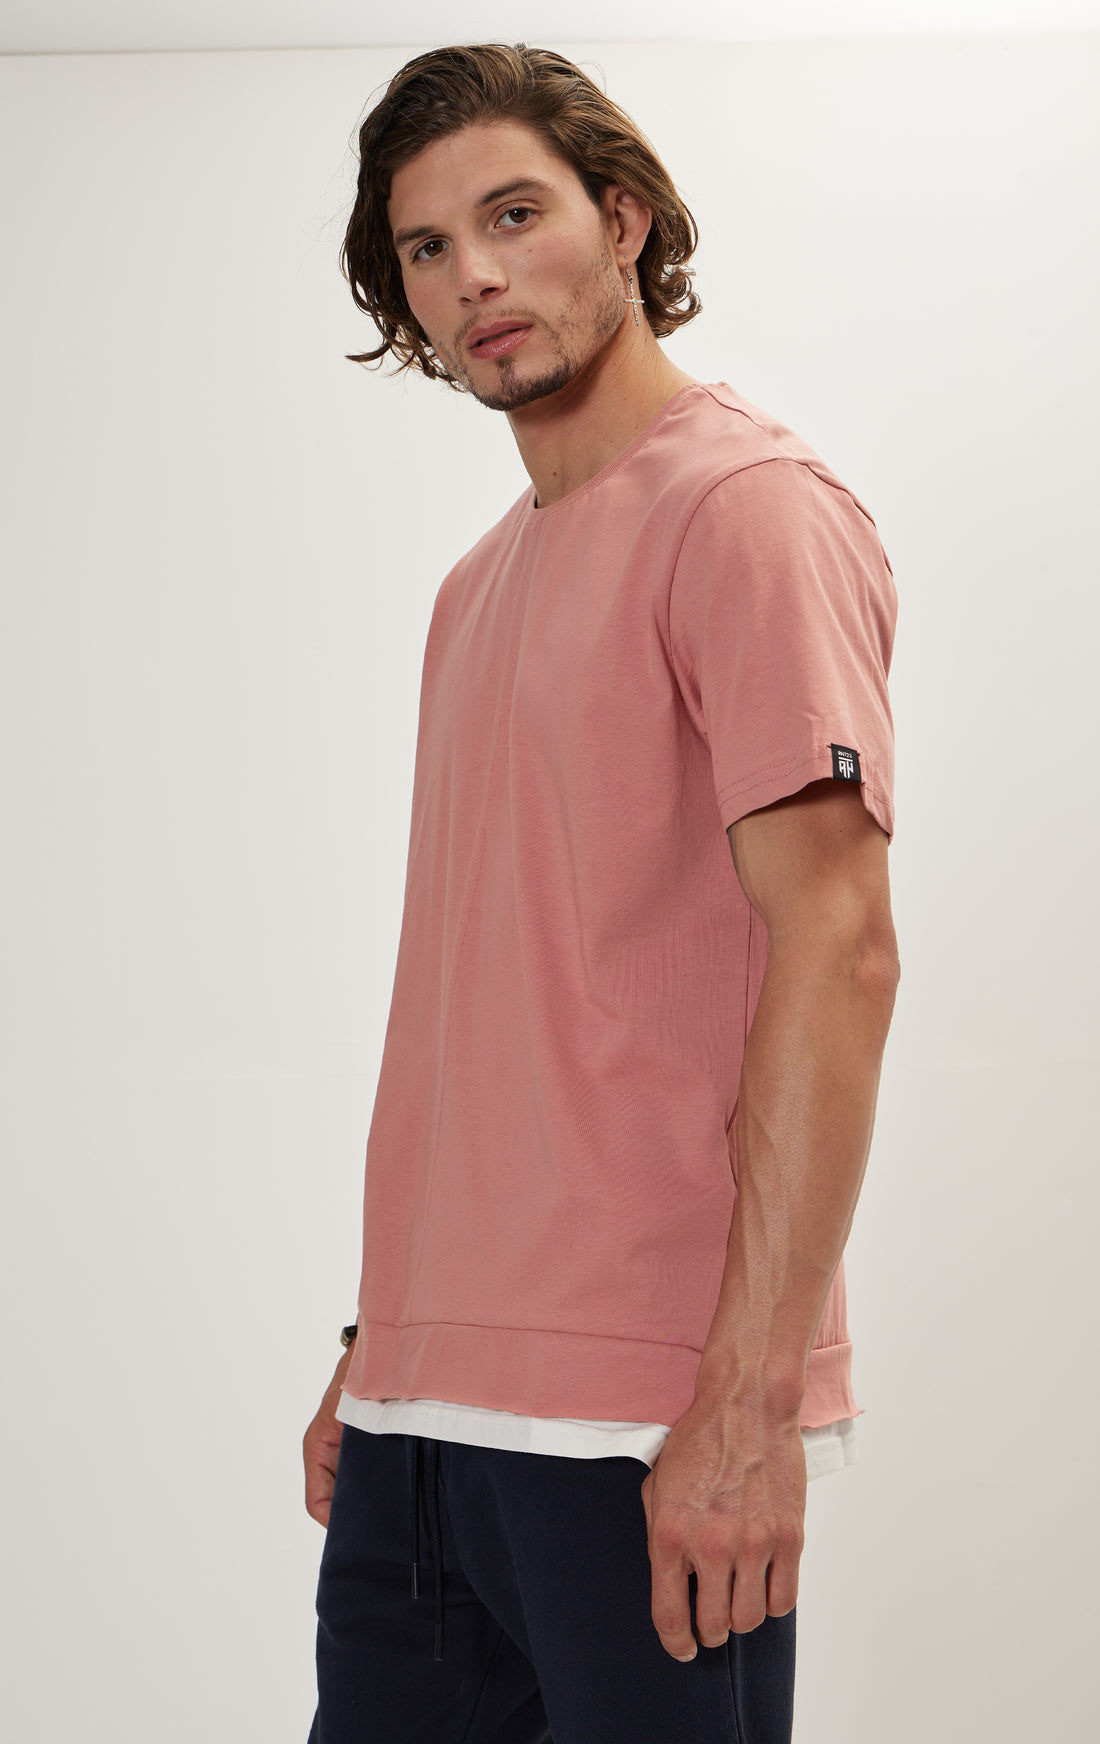 N° 8135 RT PURE COTTON SCOOP NECK TEE - ROSE